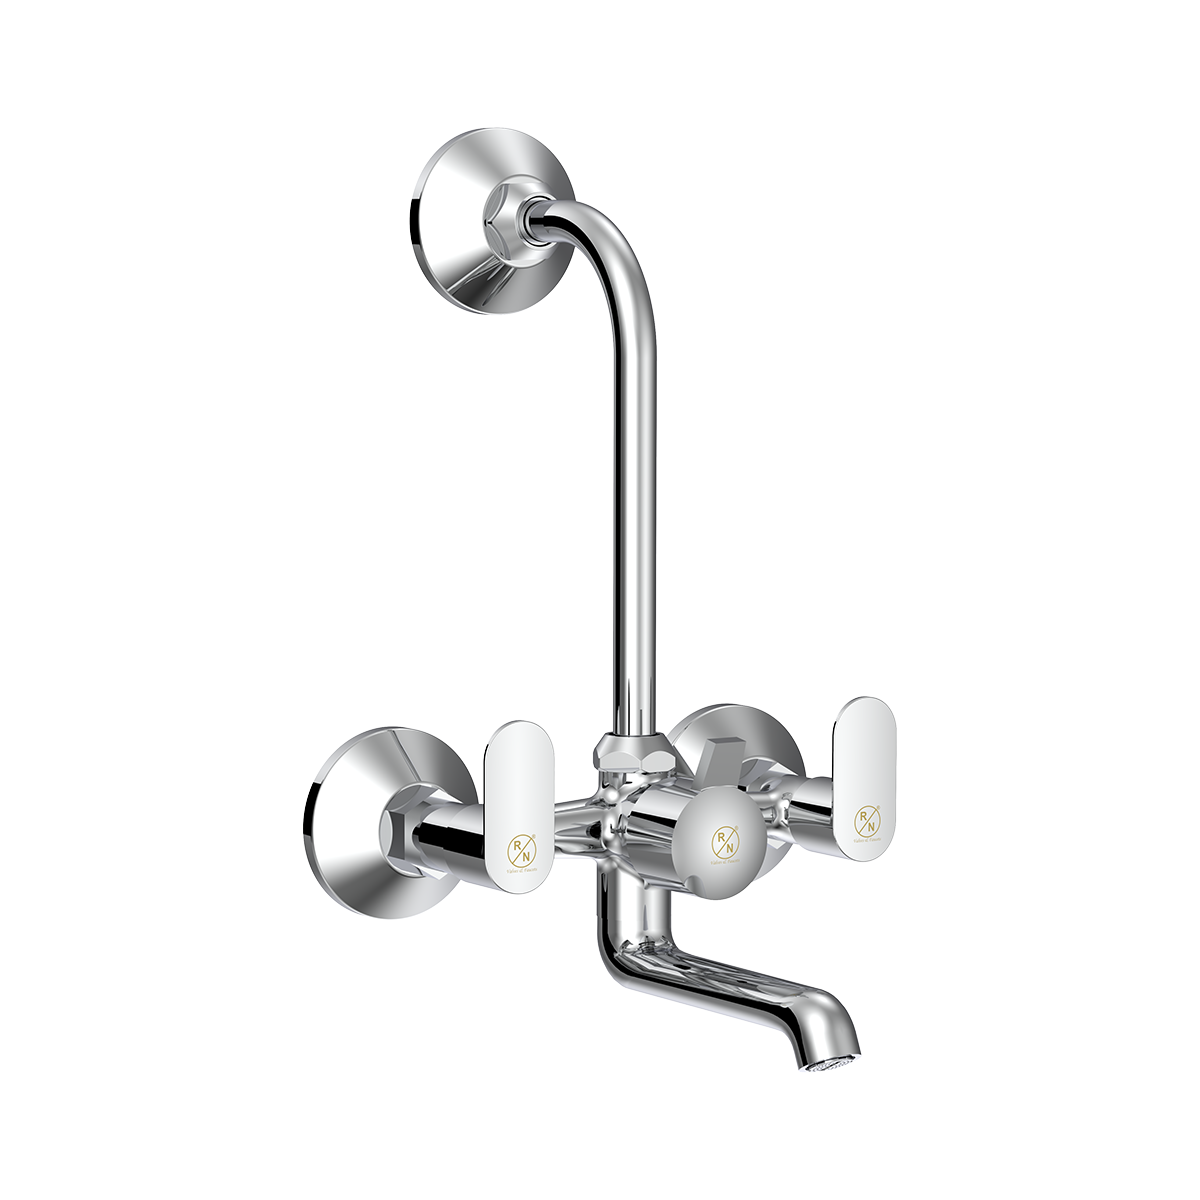 Wall Mixer With Provision Of Overhead Shower With L-Bend